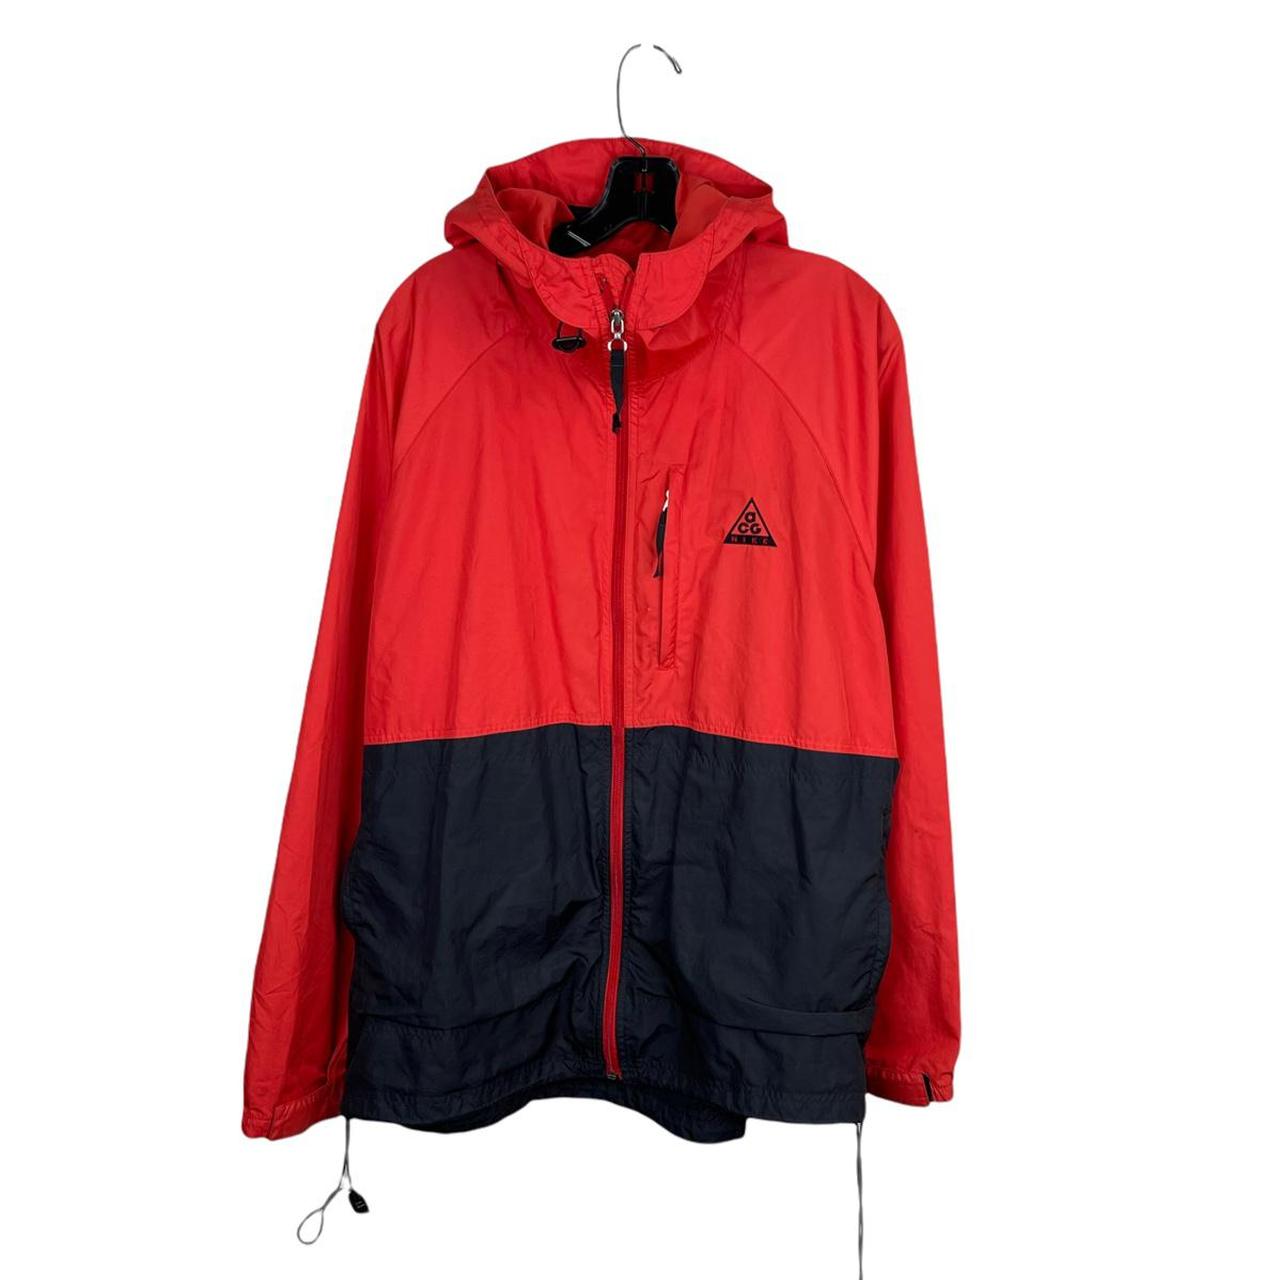 Nike Men's Red and Black Jacket